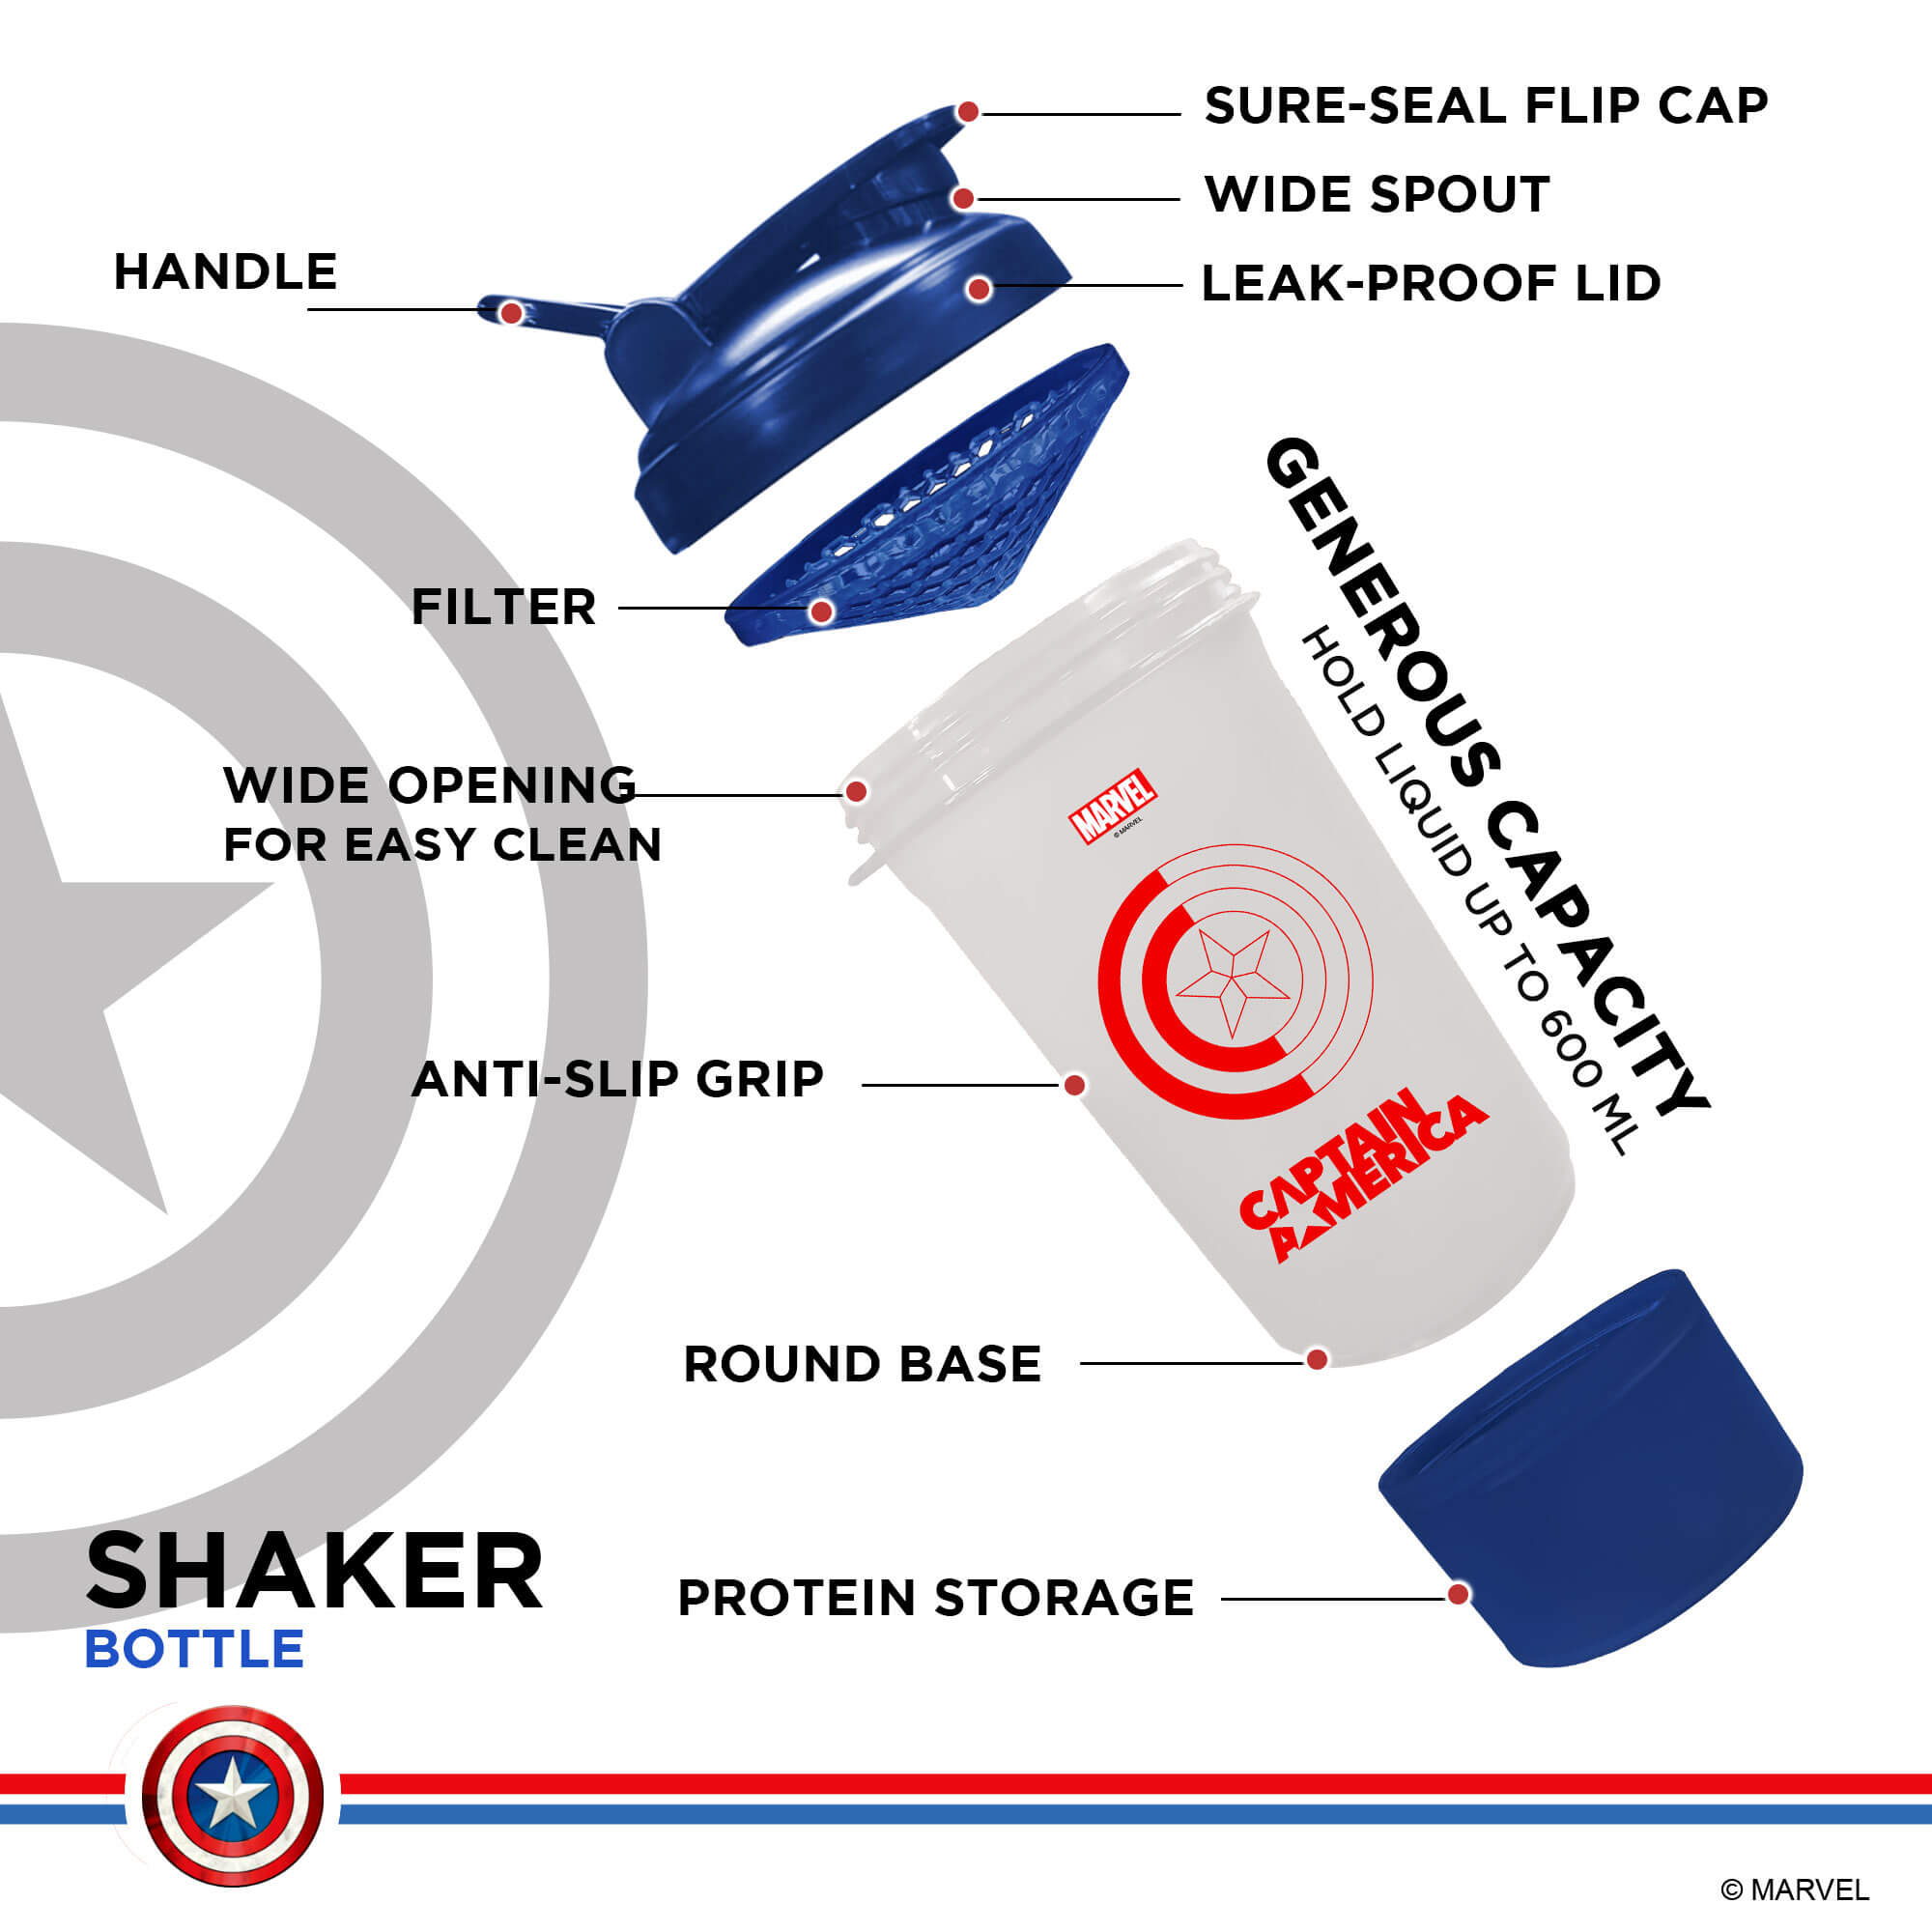  PowerMax x Marvel MSB-6S-CA-CLEAR (600ml) Captain America Marvel Edition Protein Shaker Bottle with Single Storage